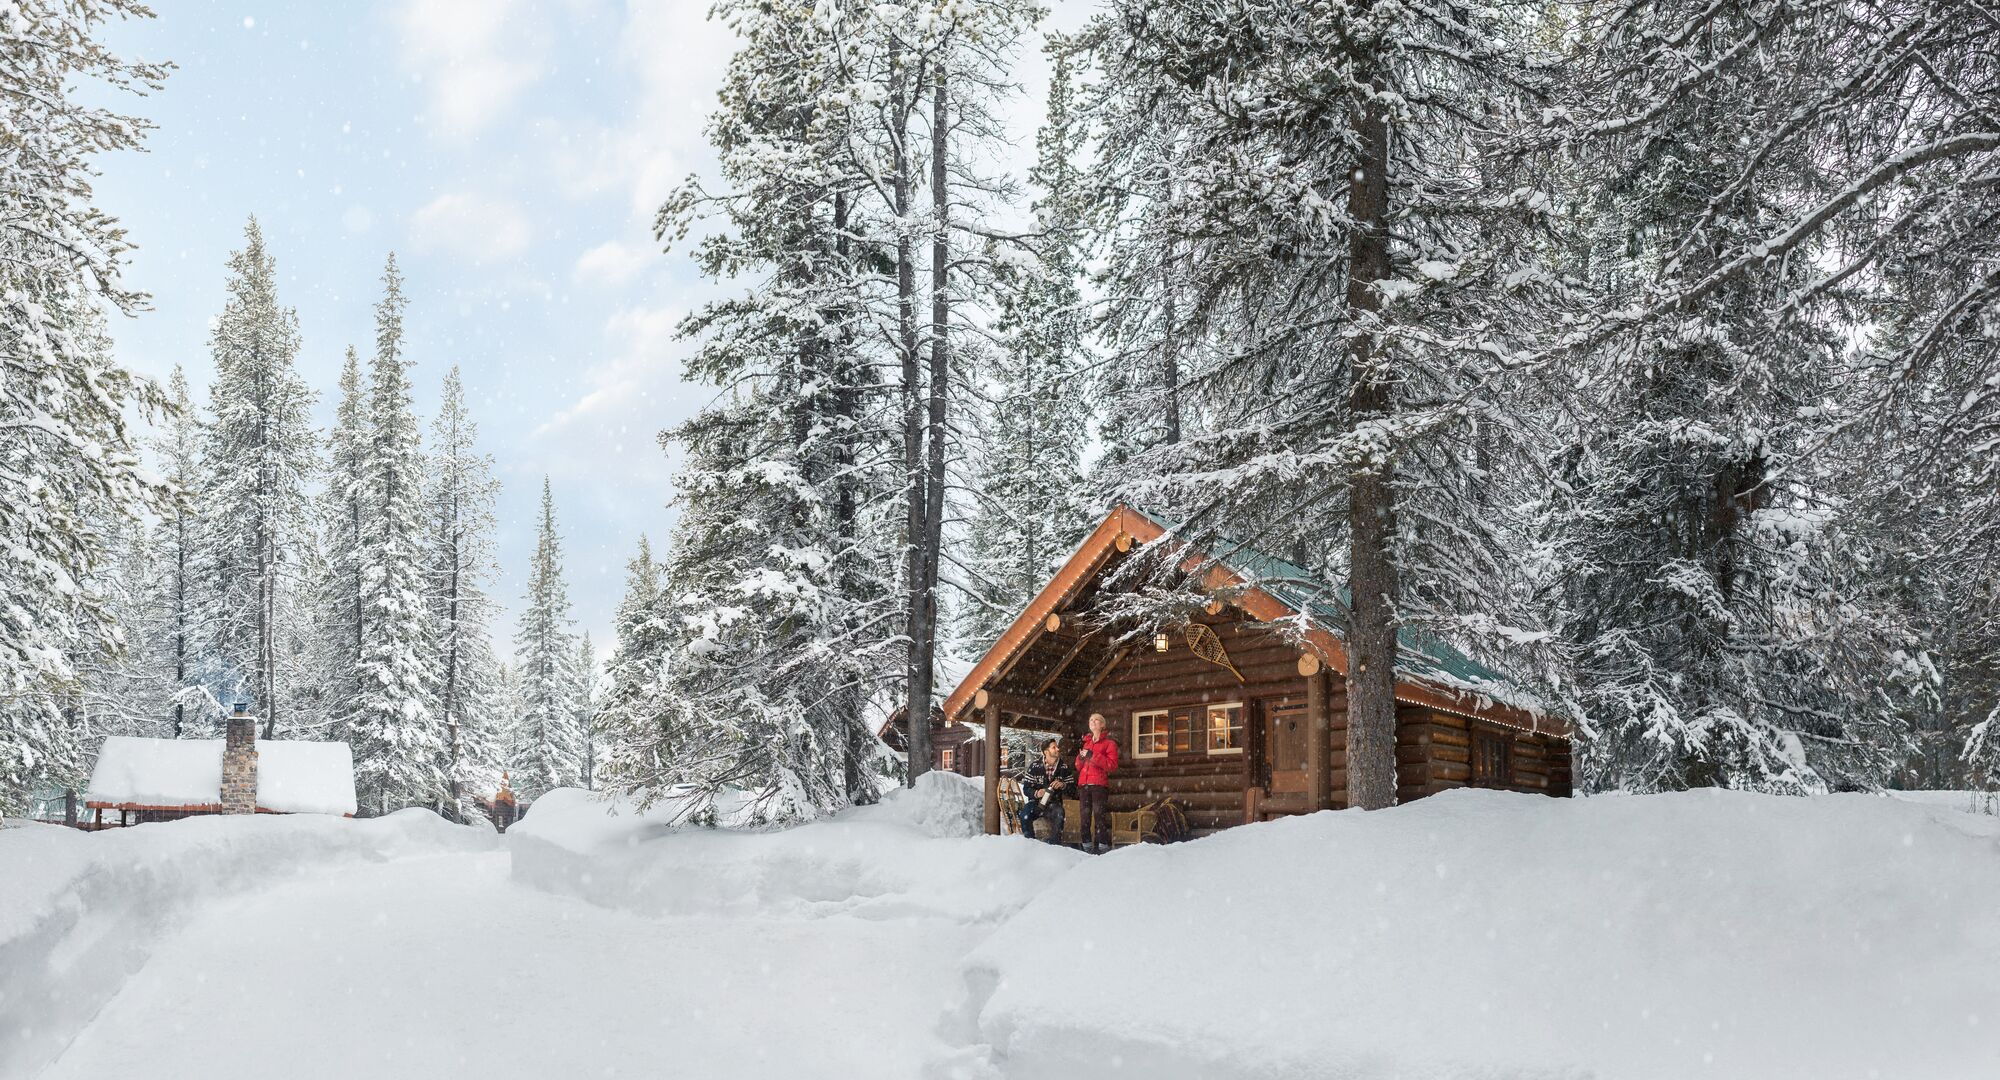 A cabin in Banff National Park covered in snow with two people on the balcony taking in the winter scenery.